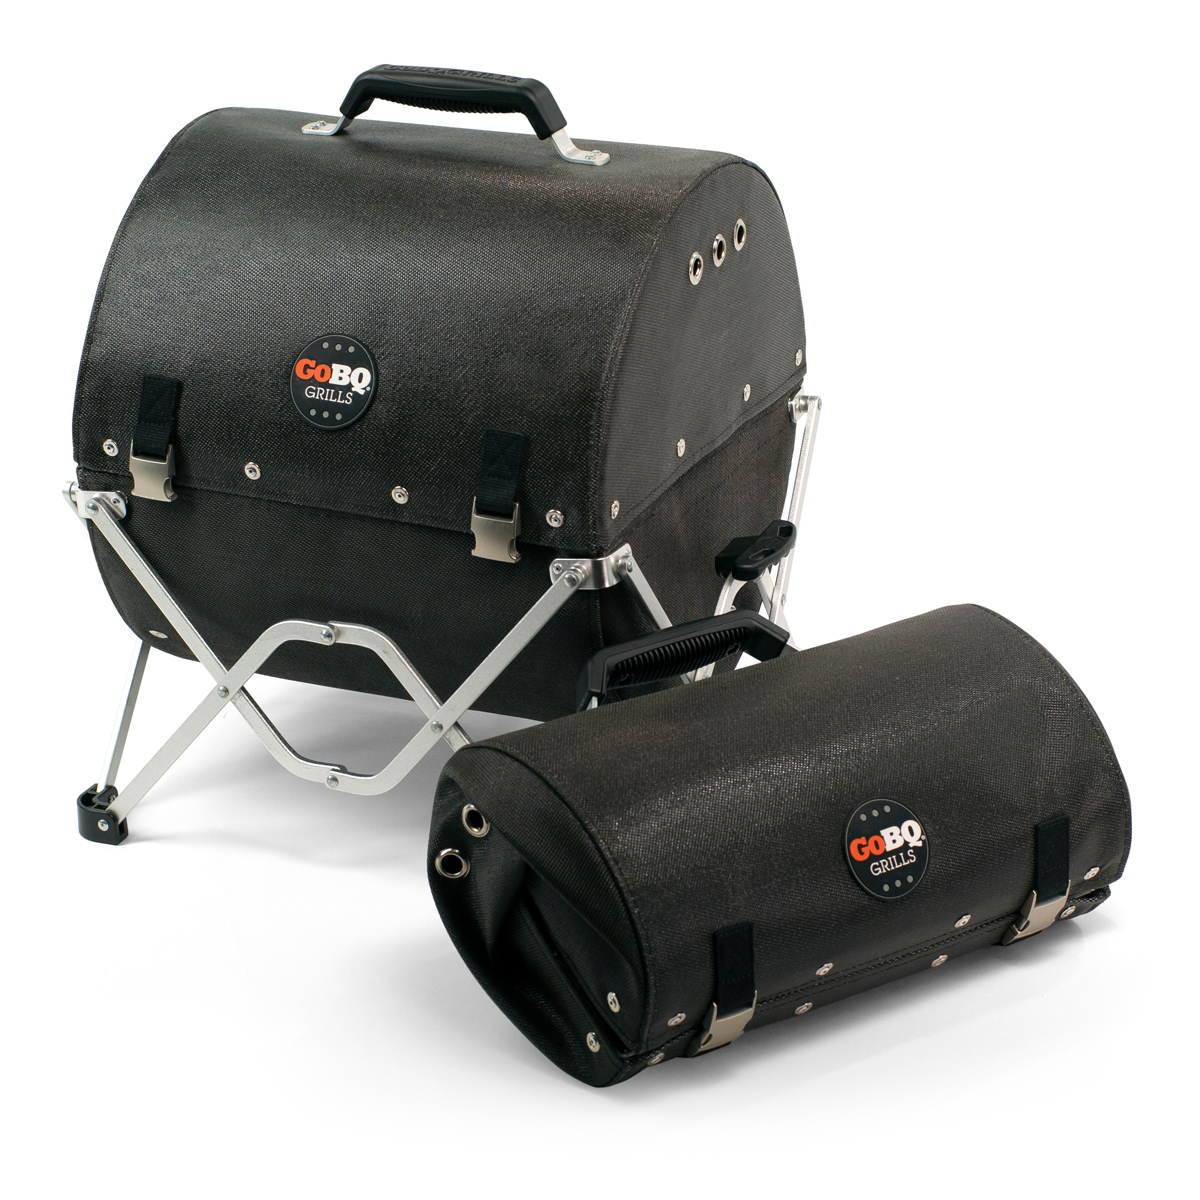 Gift GoBQ Portable Charcoal Grill